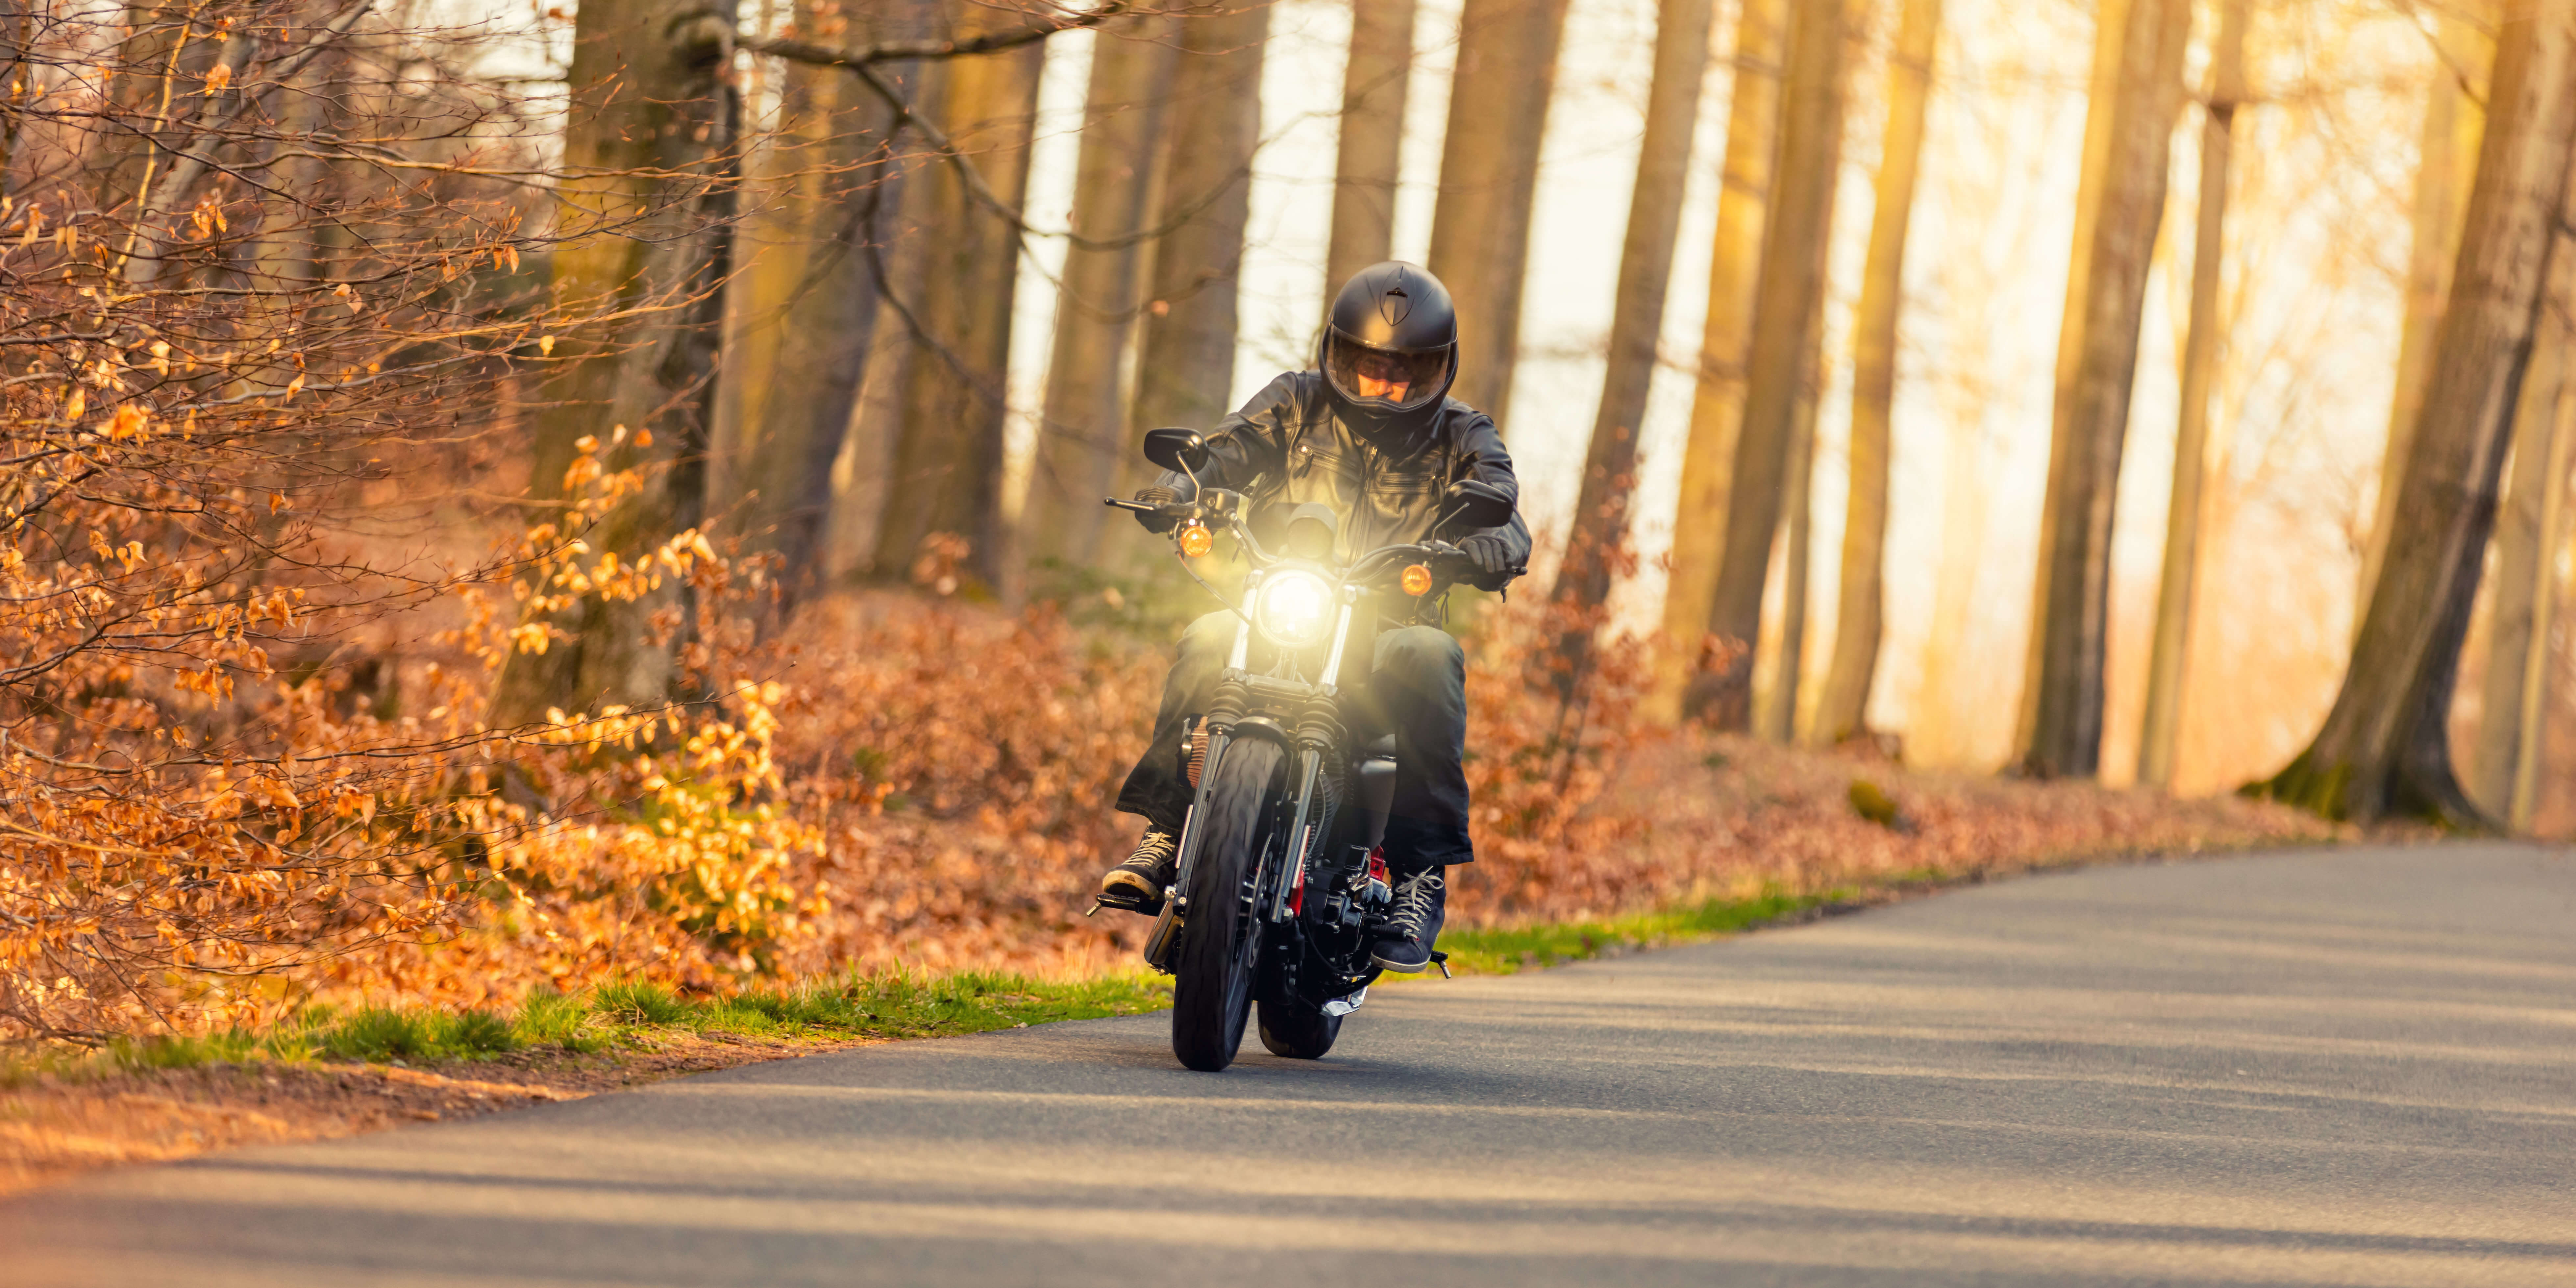 Motorcycle Rider in Fall Leaves